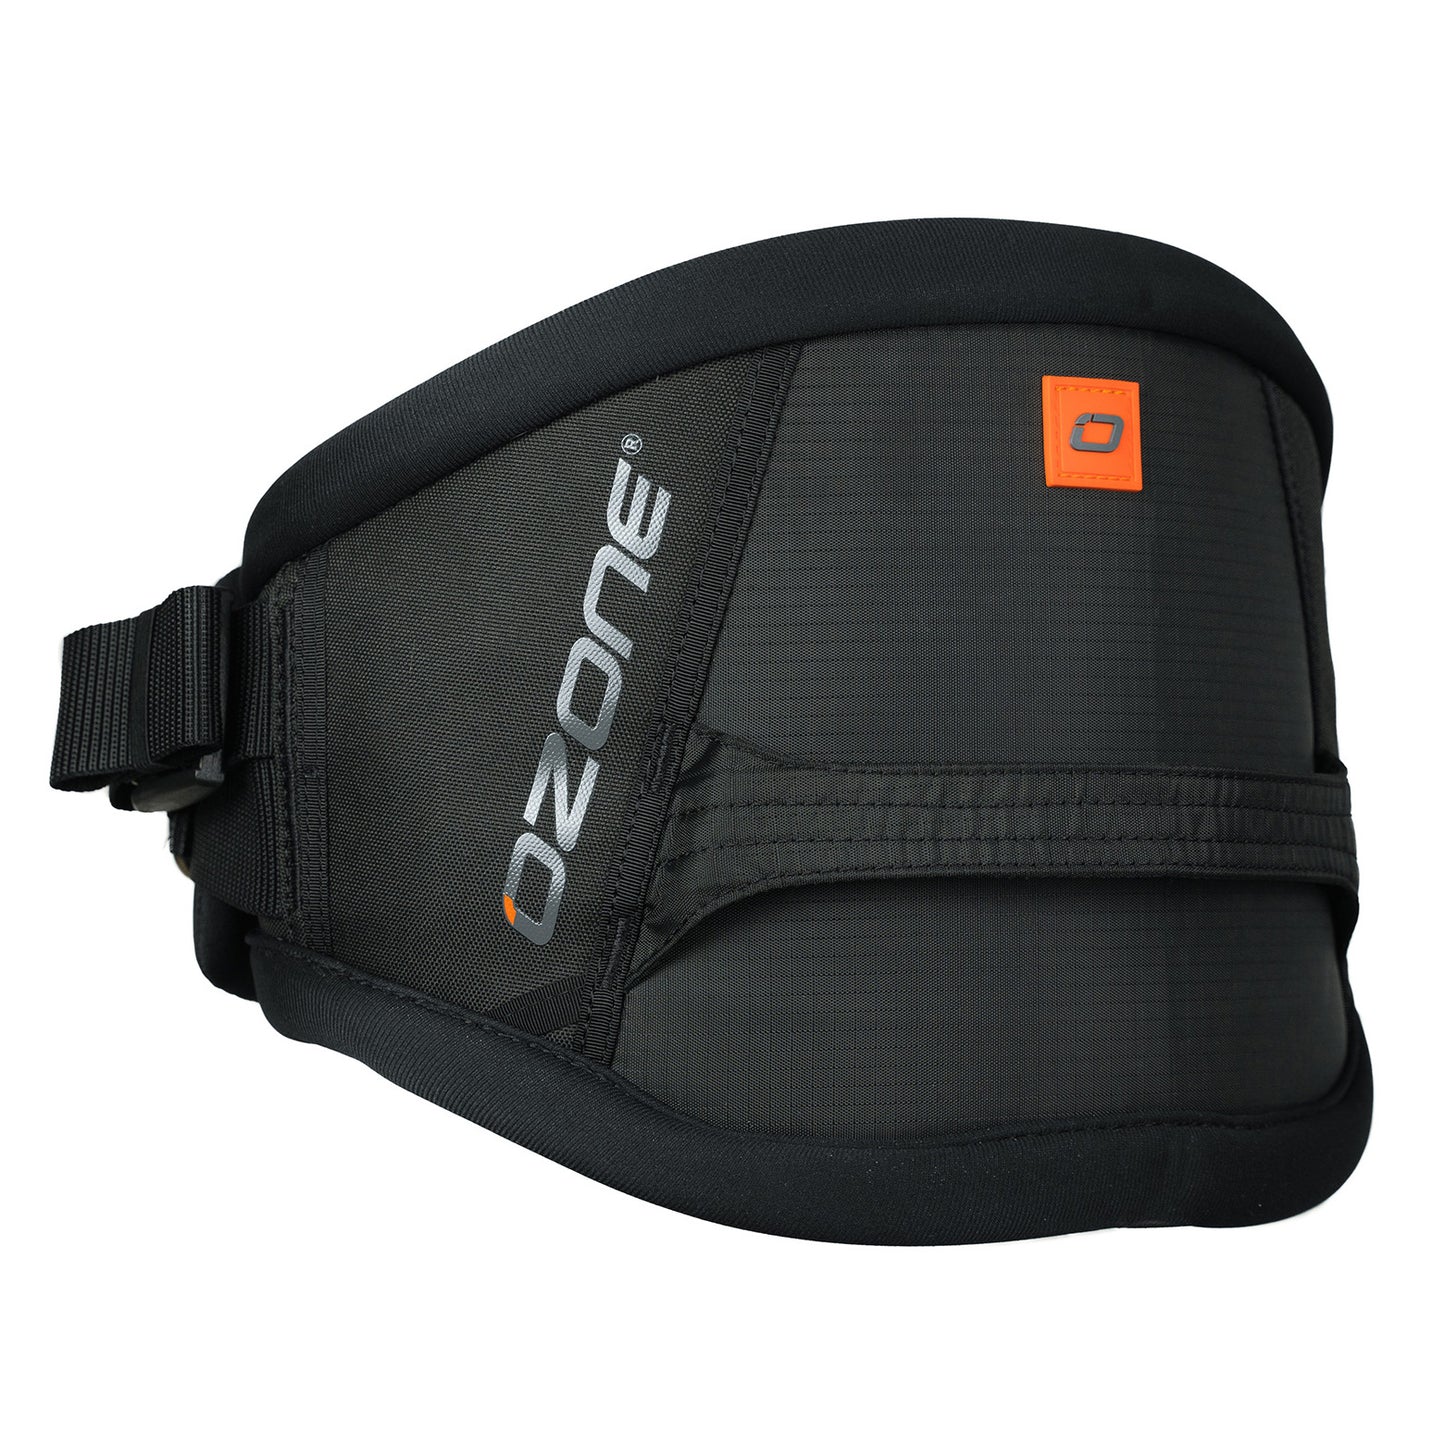 Ozone Connect V4 Waist Harness